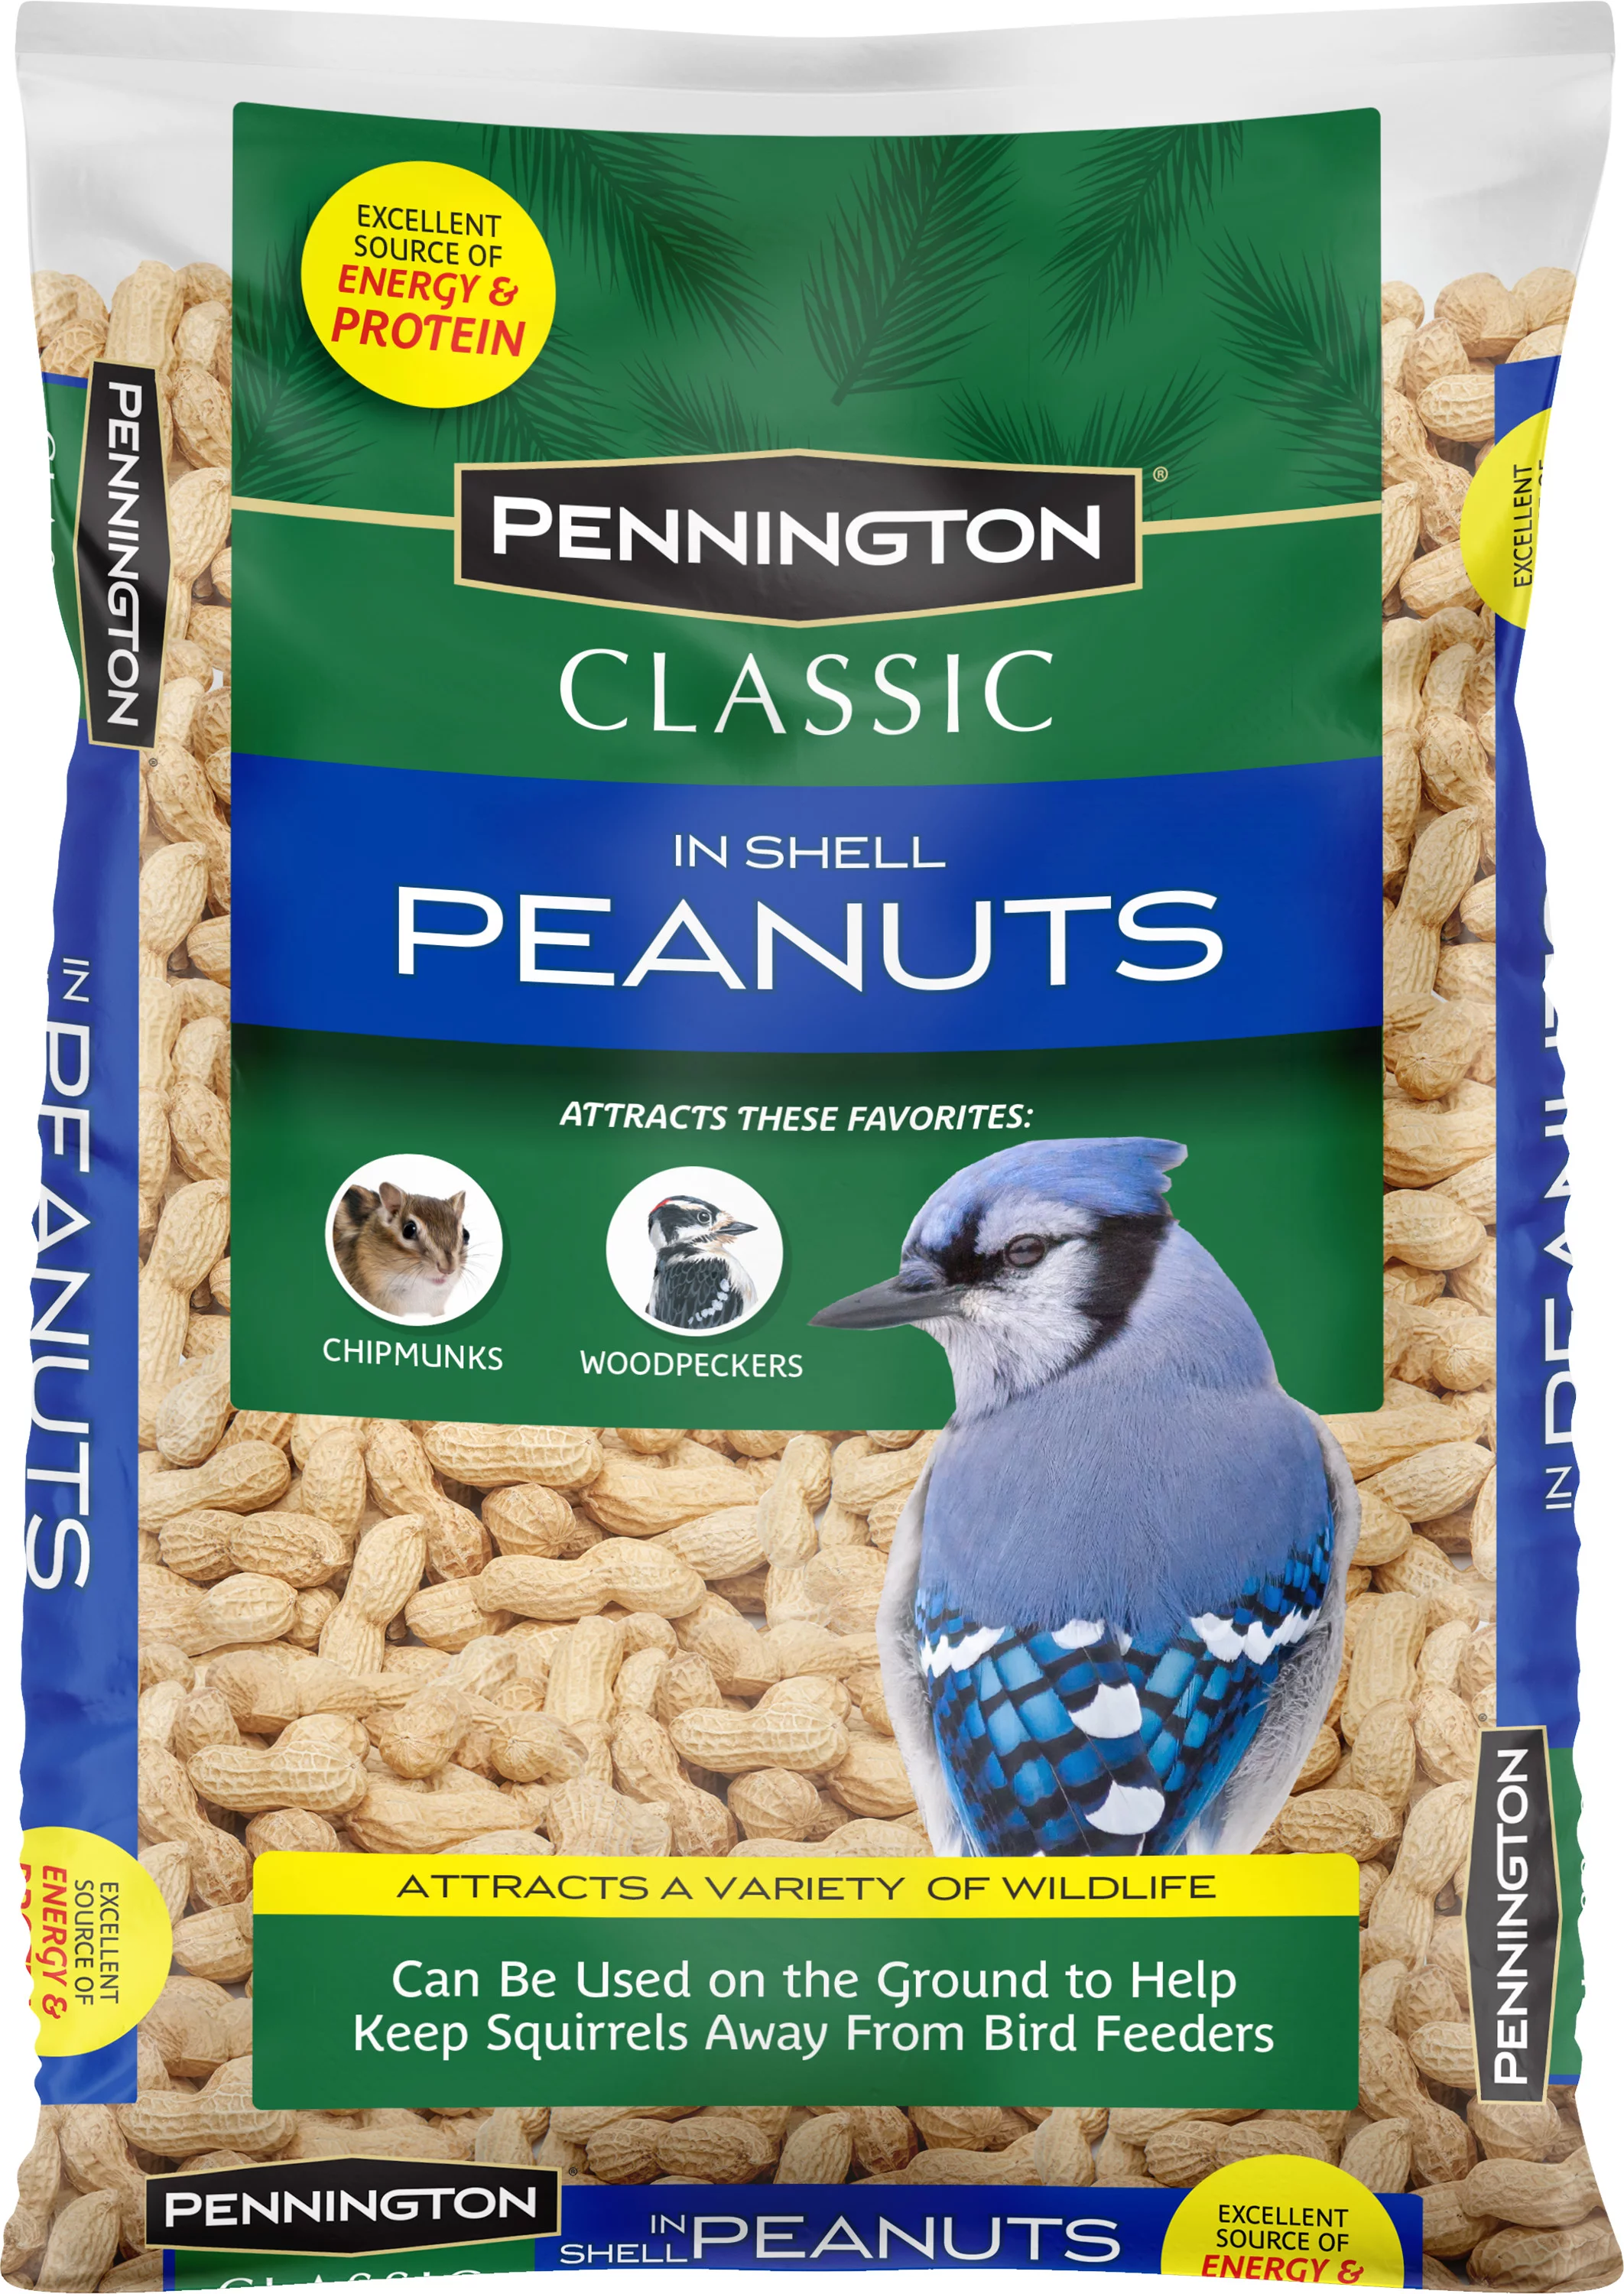 Pennington In Shell Peanuts Wildlife and Wild Bird Food, 5 lb. Bag, Dry, 1 Pack